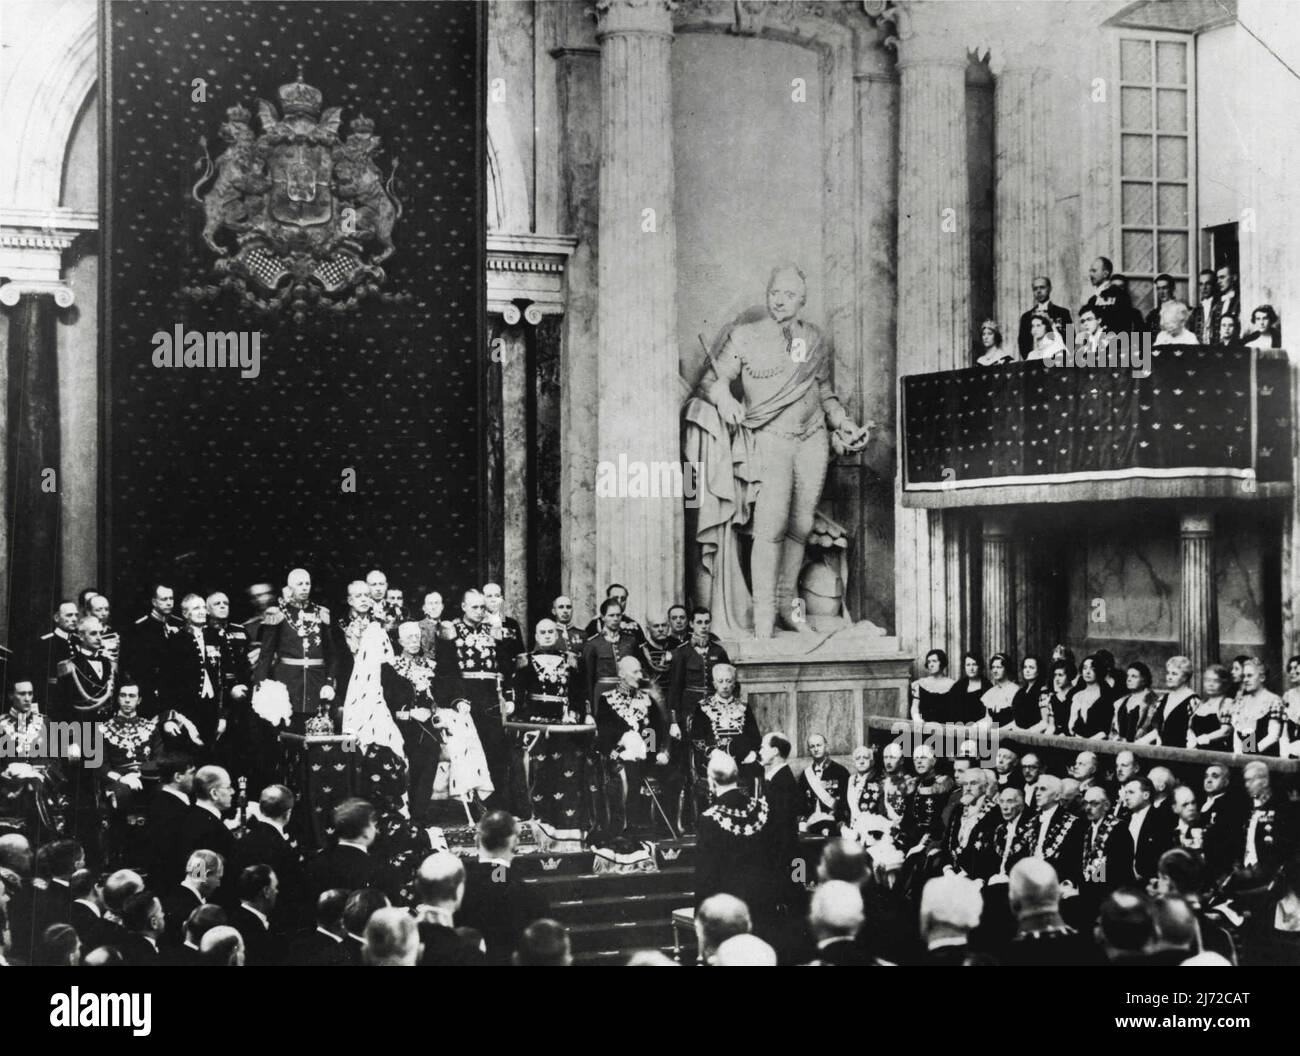 The Opening of The Swedish Parliament -- The scene at the opening ceremony. In centre may be seen King Gustav V. Sitting, extreme left, Prince Carl, Junior, and Prince Gustav Adolf, the eldest son of the Crown Prince. To the right, sitting, Prince Carl, Senior, and Prince Eugen. On the balcony, Princess Ingeborg, Princess Sibylla and Prince Carl Johan. February 09, 1935. (Photo by Sport & General Press Agency, Limited). Stock Photo